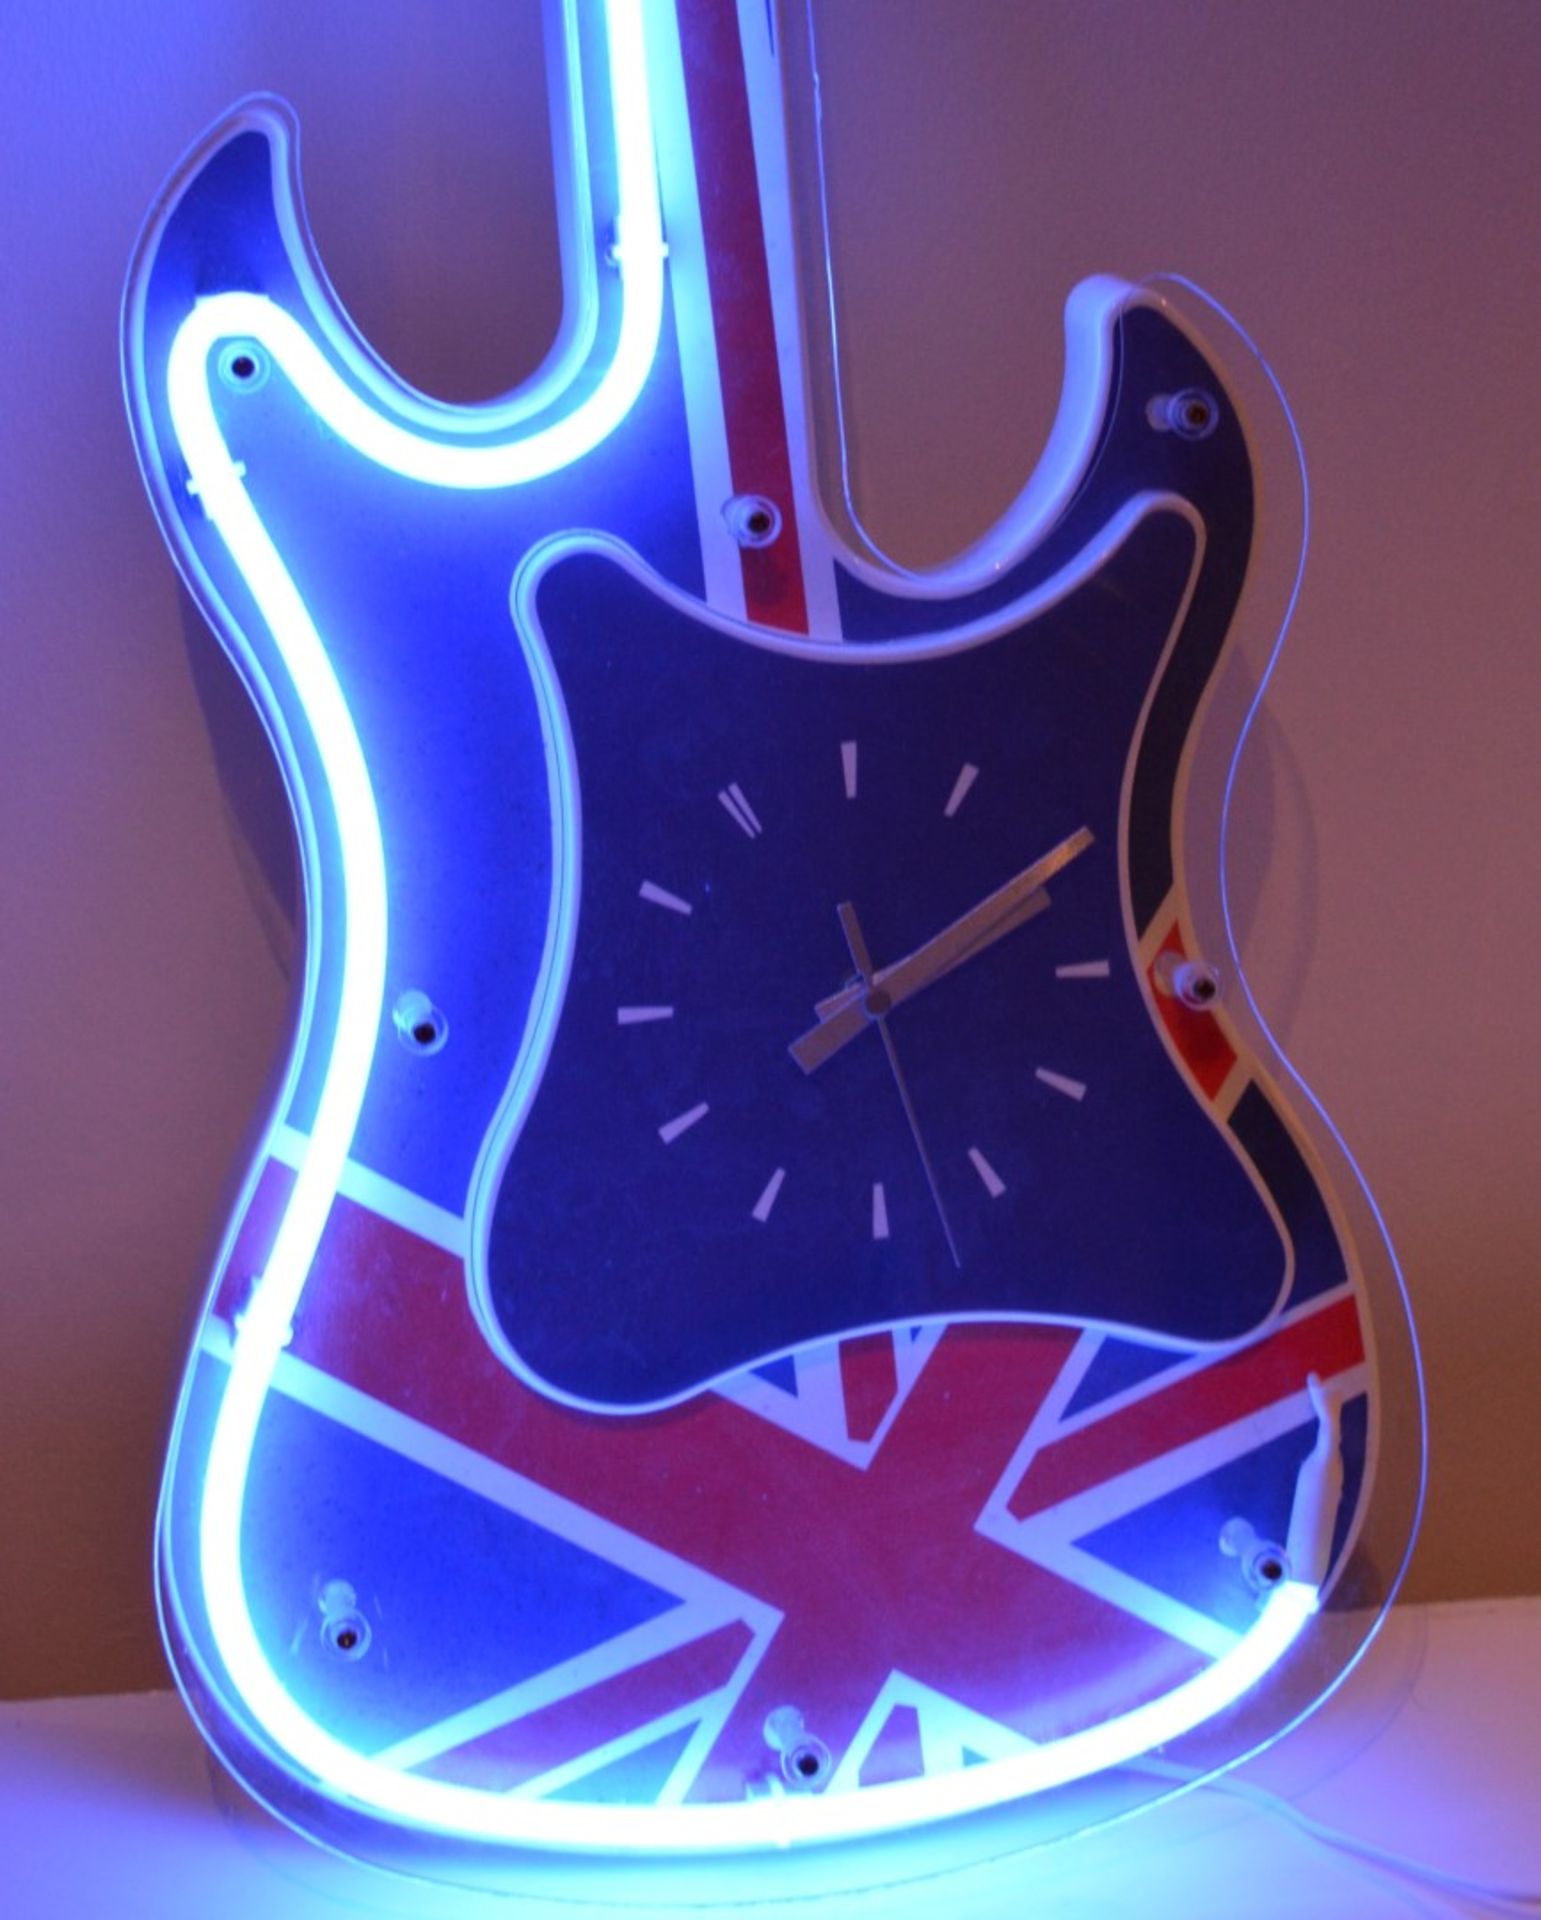 1 x Illuminated Neon Britpop Union Jack Guitar Shaped Clock - Preowned In Good Working Condition - - Image 4 of 5